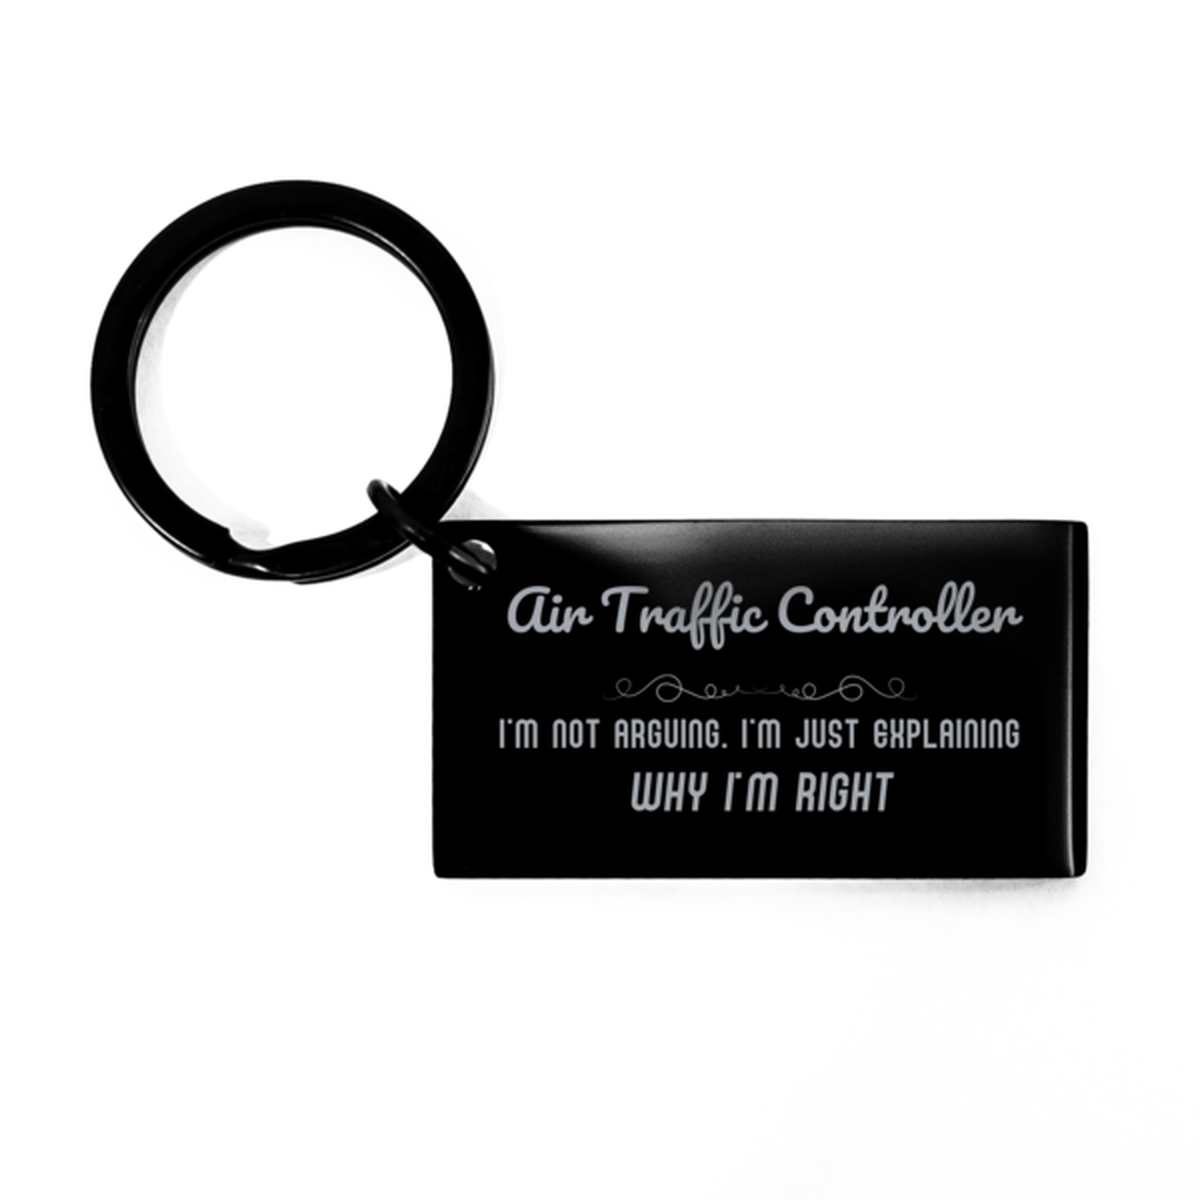 Air Traffic Controller I'm not Arguing. I'm Just Explaining Why I'm RIGHT Keychain, Funny Saying Quote Air Traffic Controller Gifts For Air Traffic Controller Graduation Birthday Christmas Gifts for Men Women Coworker